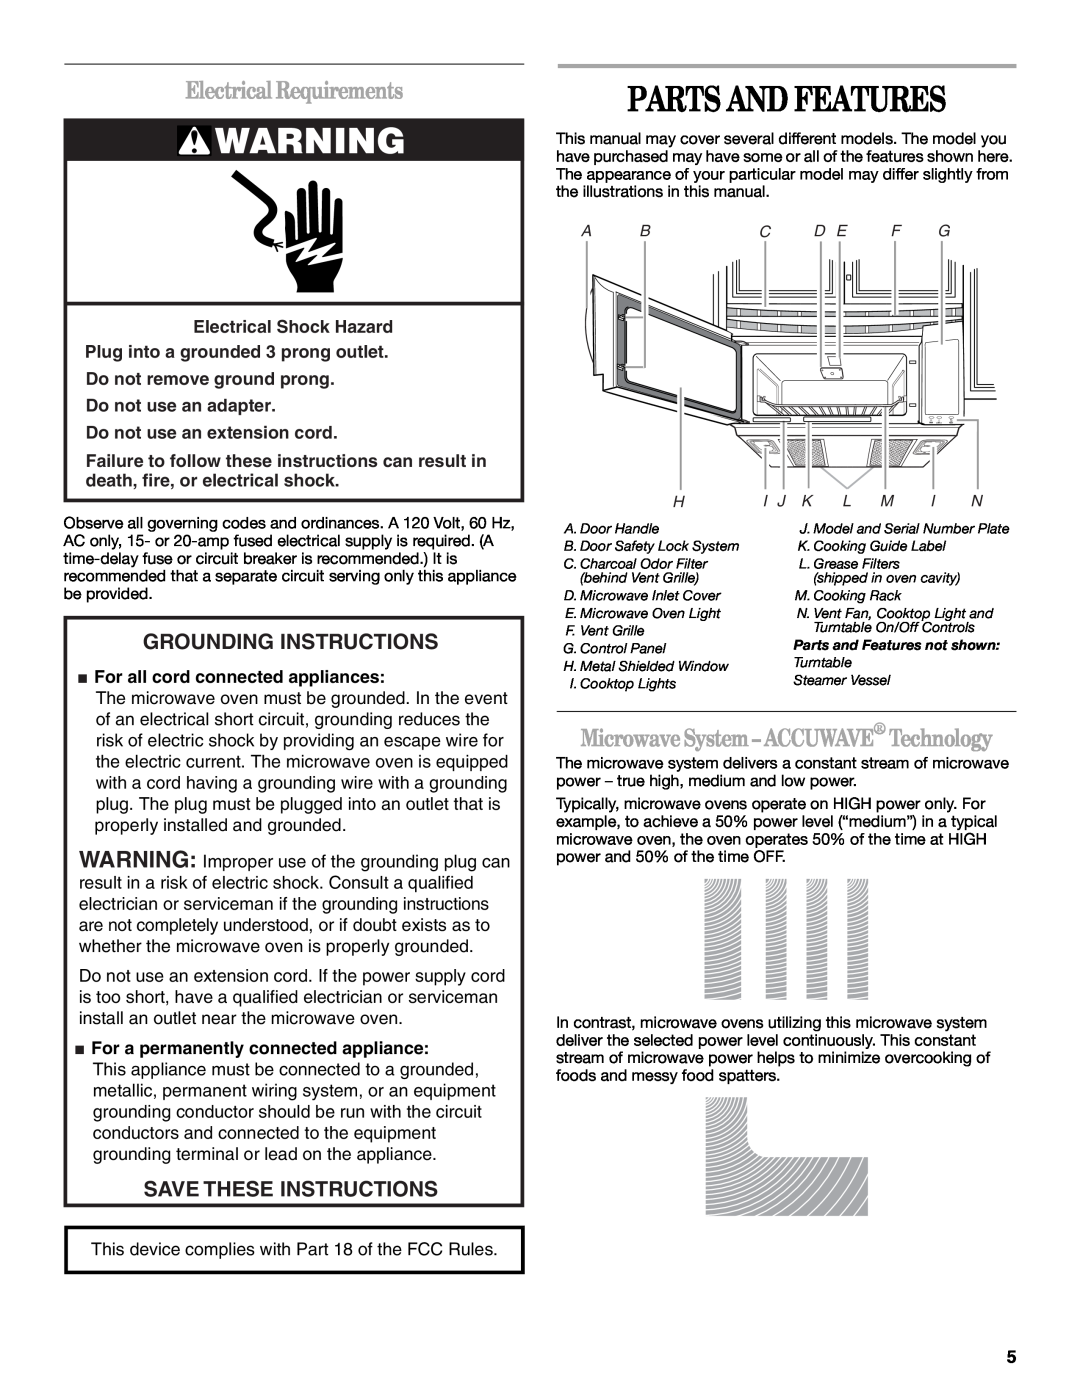 Whirlpool GH5176XP manual Parts And Features, Electrical Requirements, Grounding Instructions, Save These Instructions 